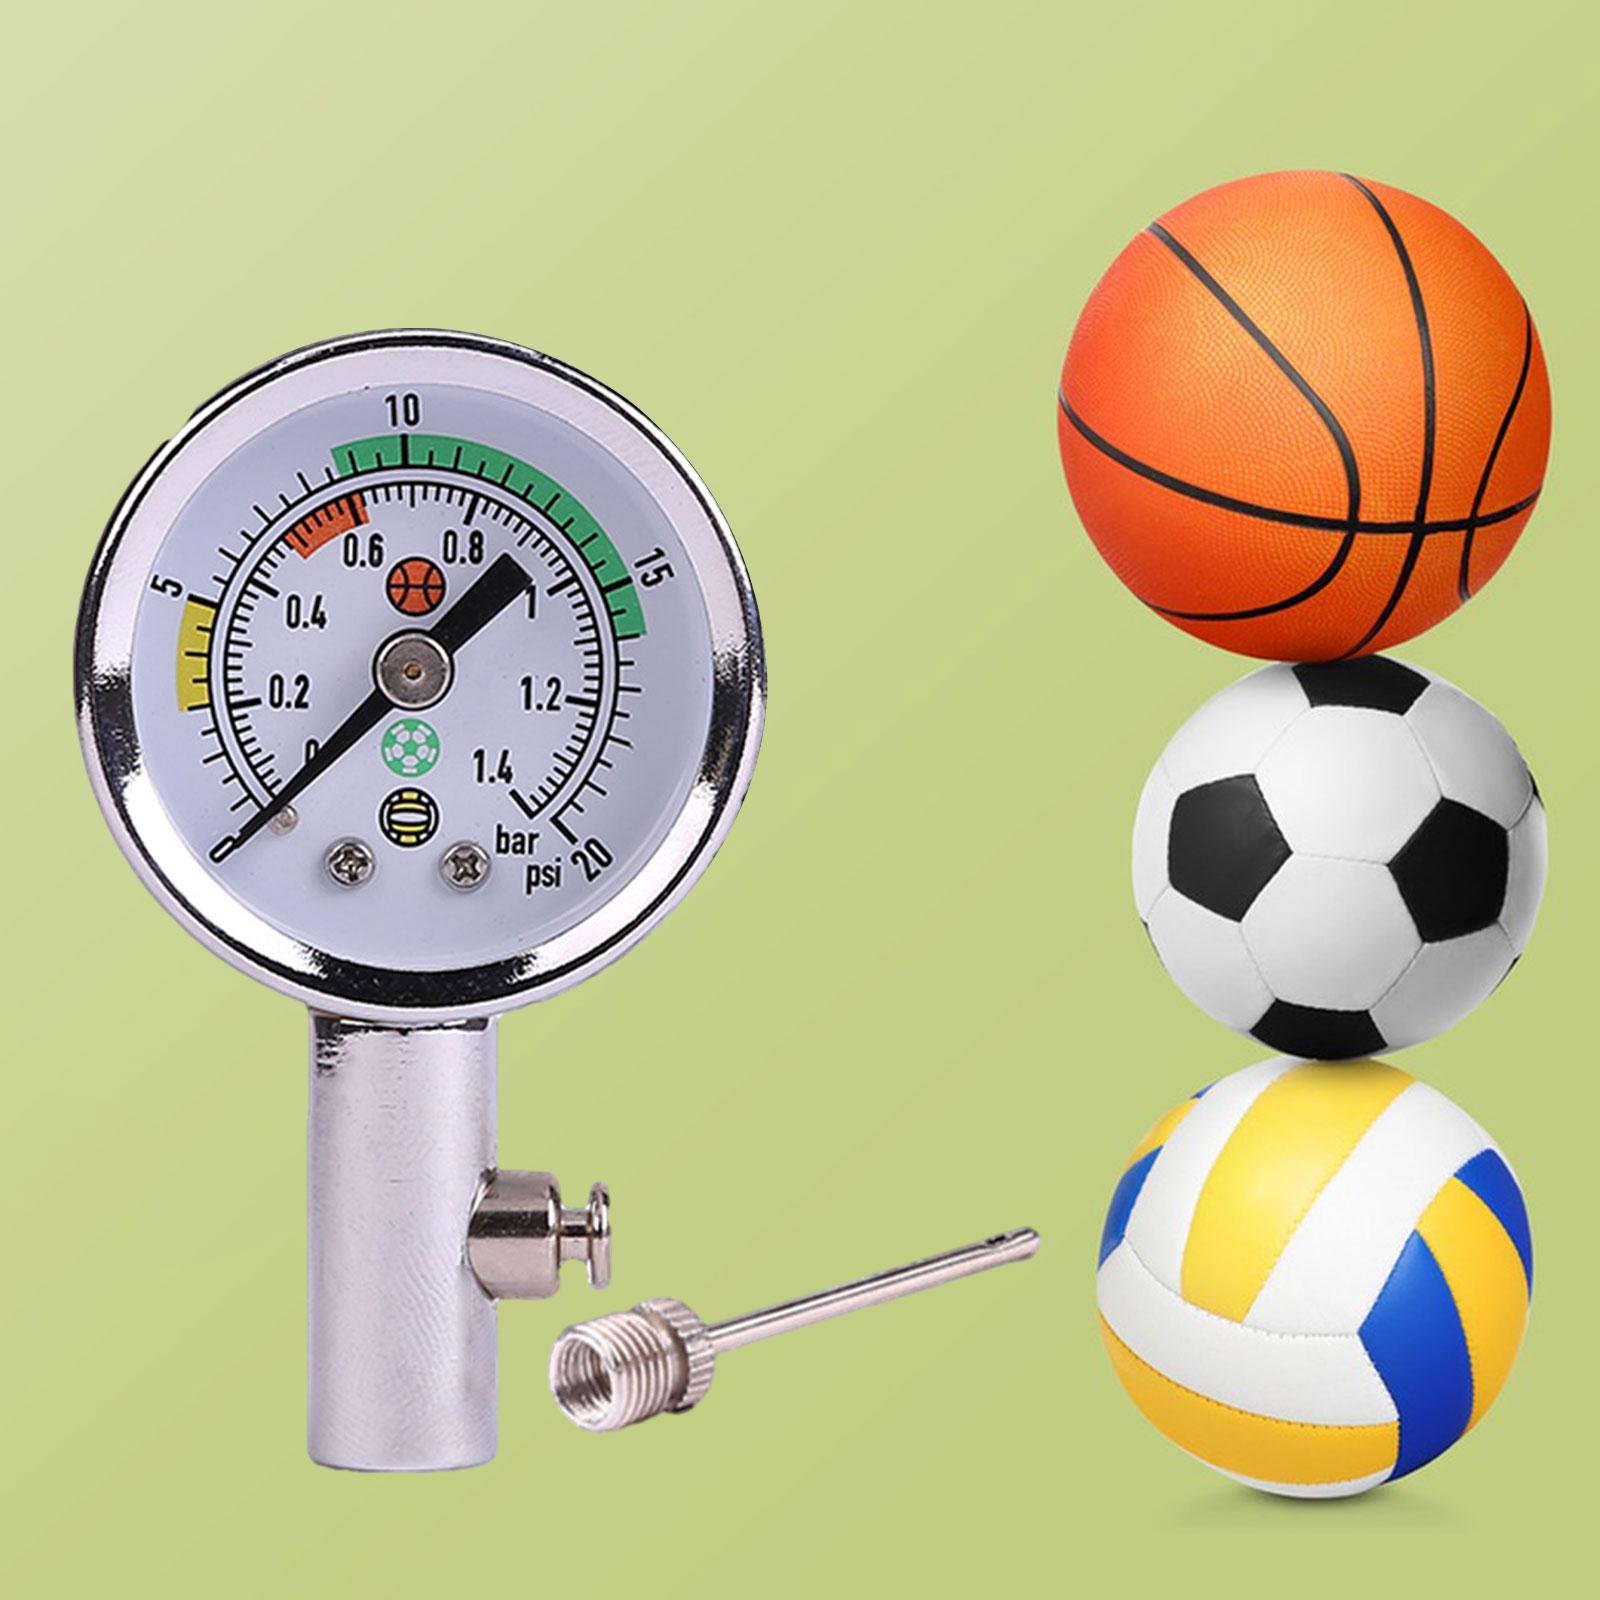 Ball Pressure Gauge Lightweight Mini Measuring for Football Rugby Volleyball without cover